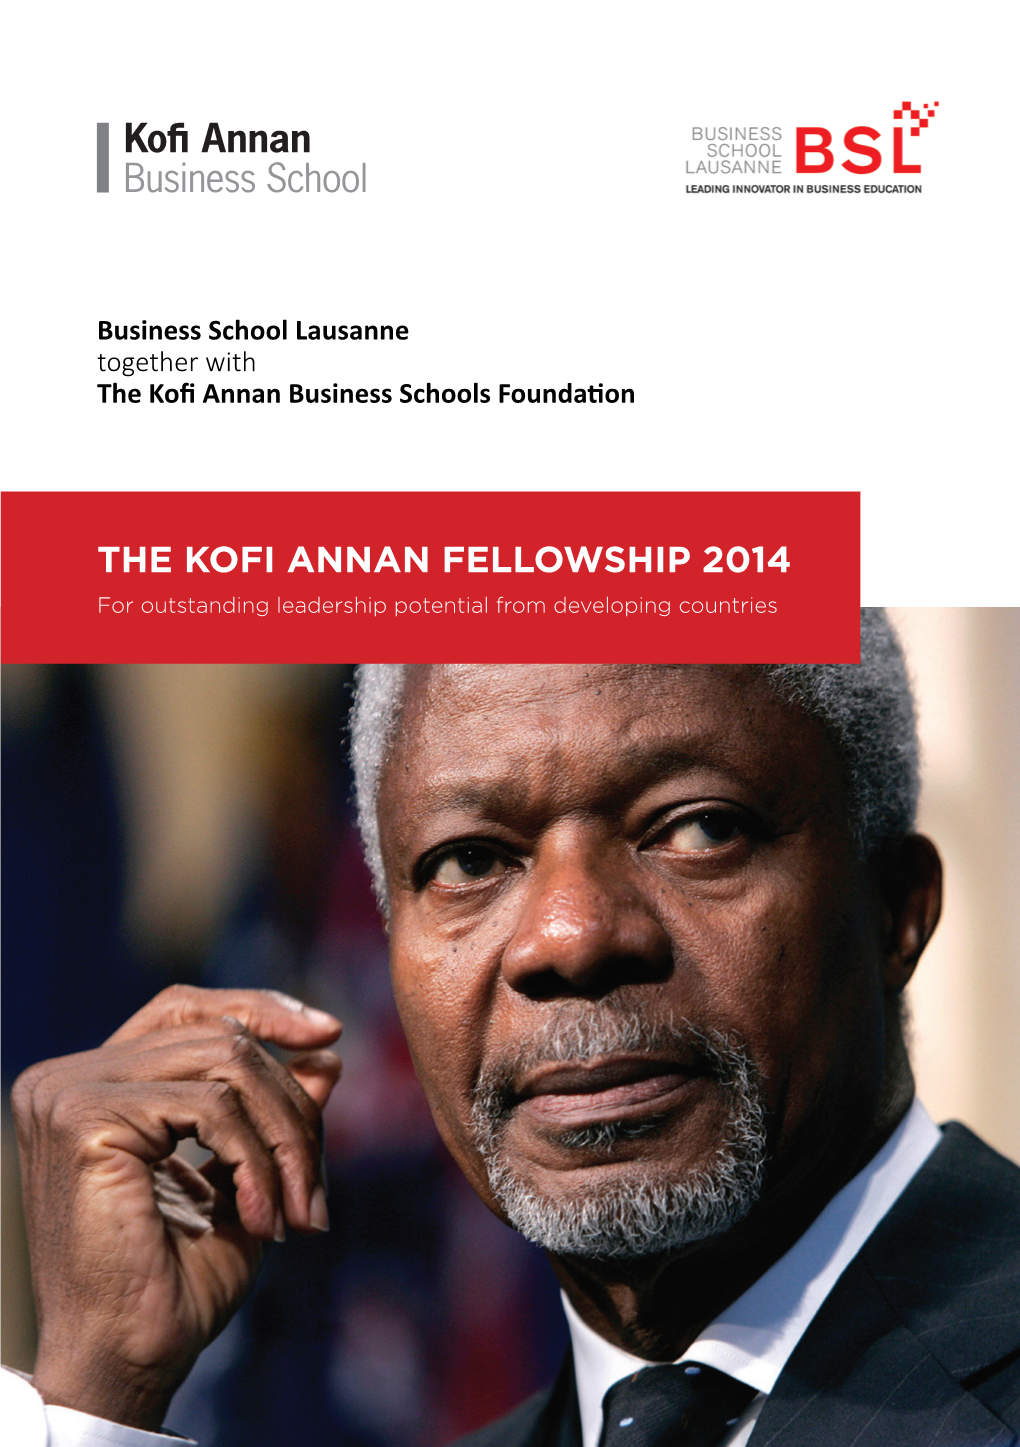 The Kofi Annan Fellowship 2014 for Outstanding Leadership Potential from Developing Countries Executive Summary the Kofi Annan Fellowship